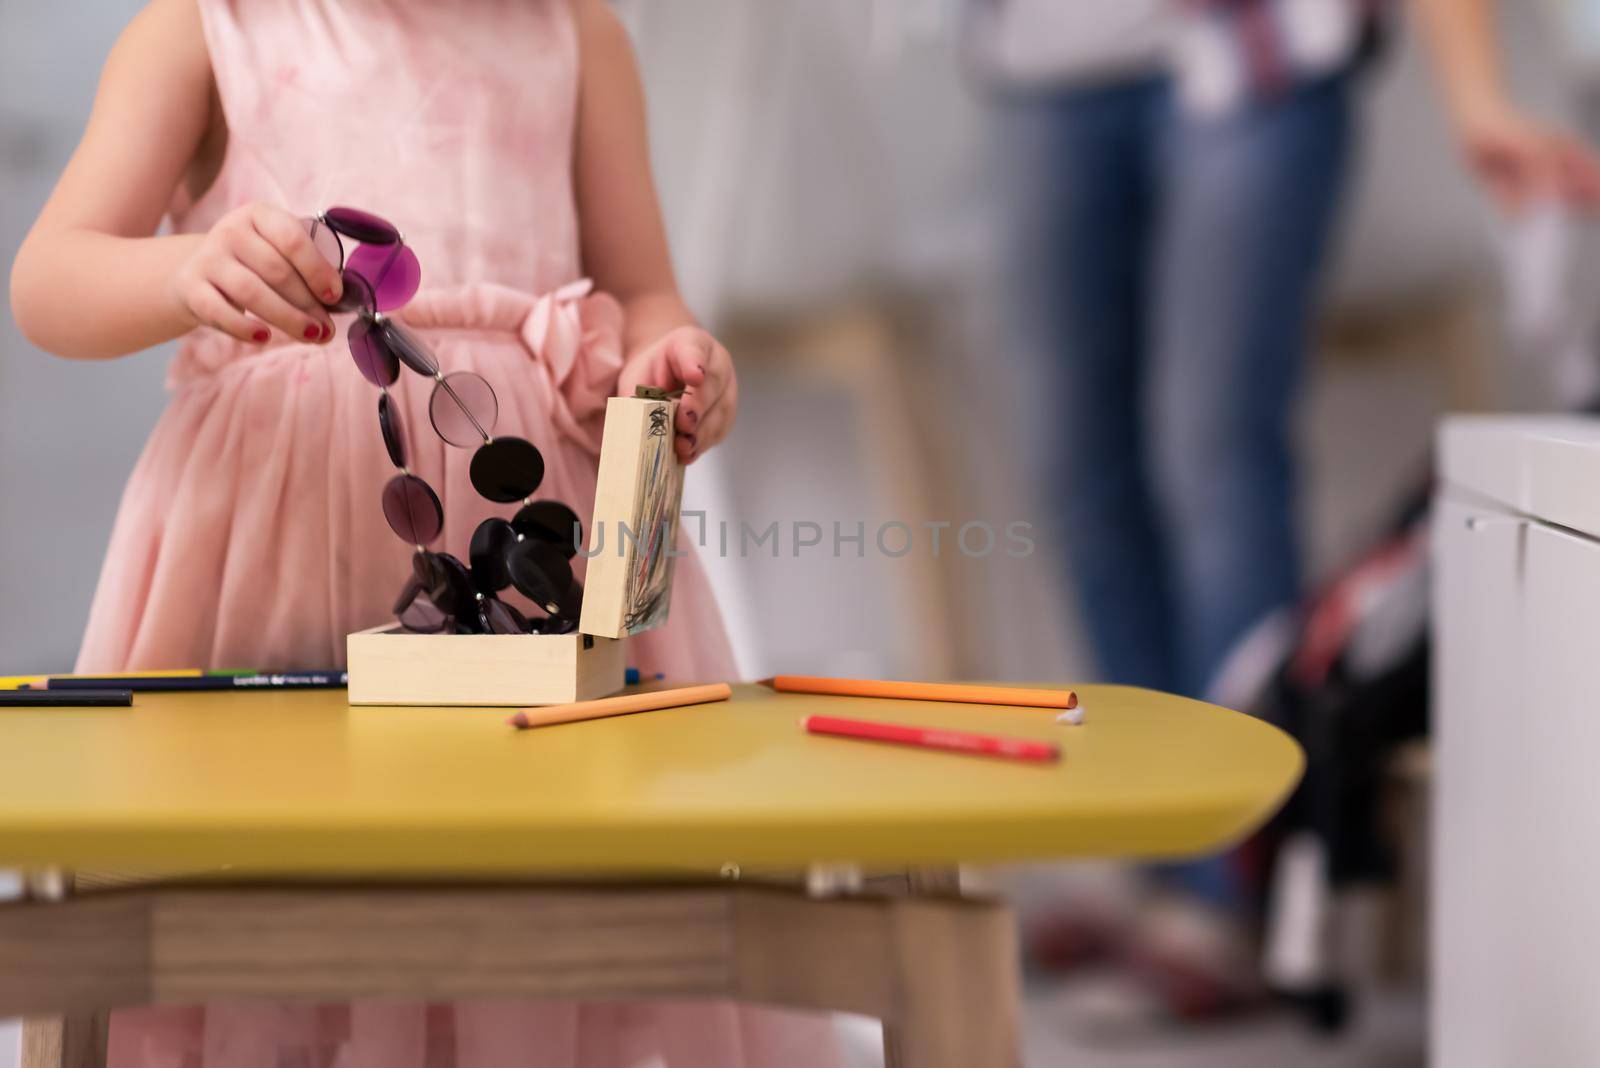 happy family spending time together at home  cute little daughter in a pink dress playing and painting the jewelry box while young redhead mother ironing clothes behind her